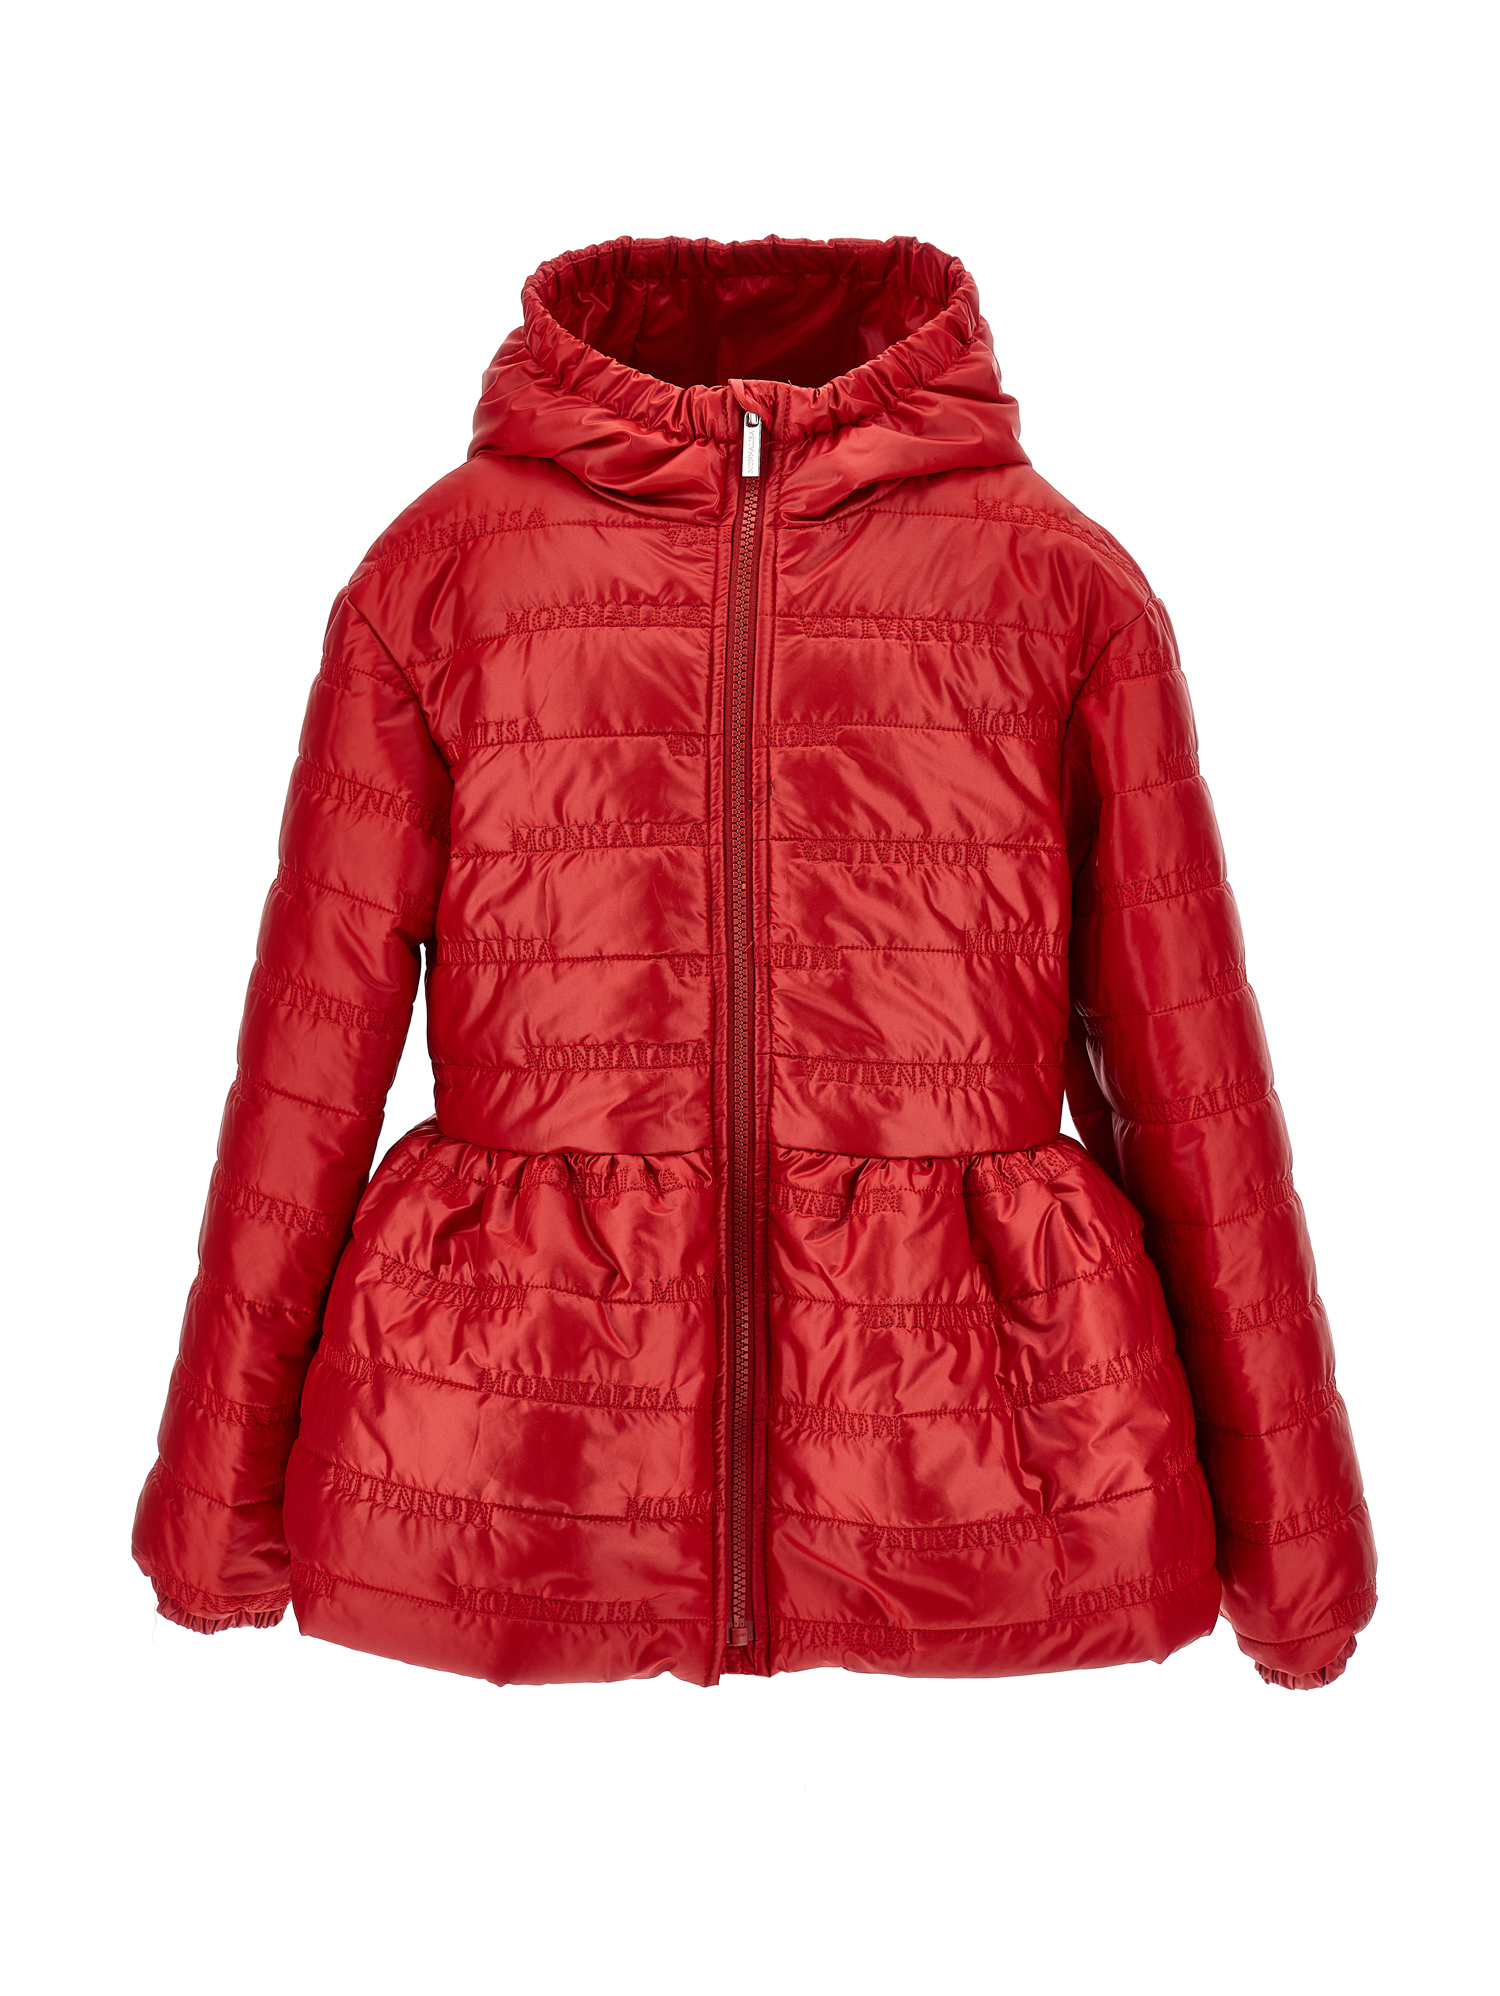 Monnalisa Quilted Extralight Jacket In Red